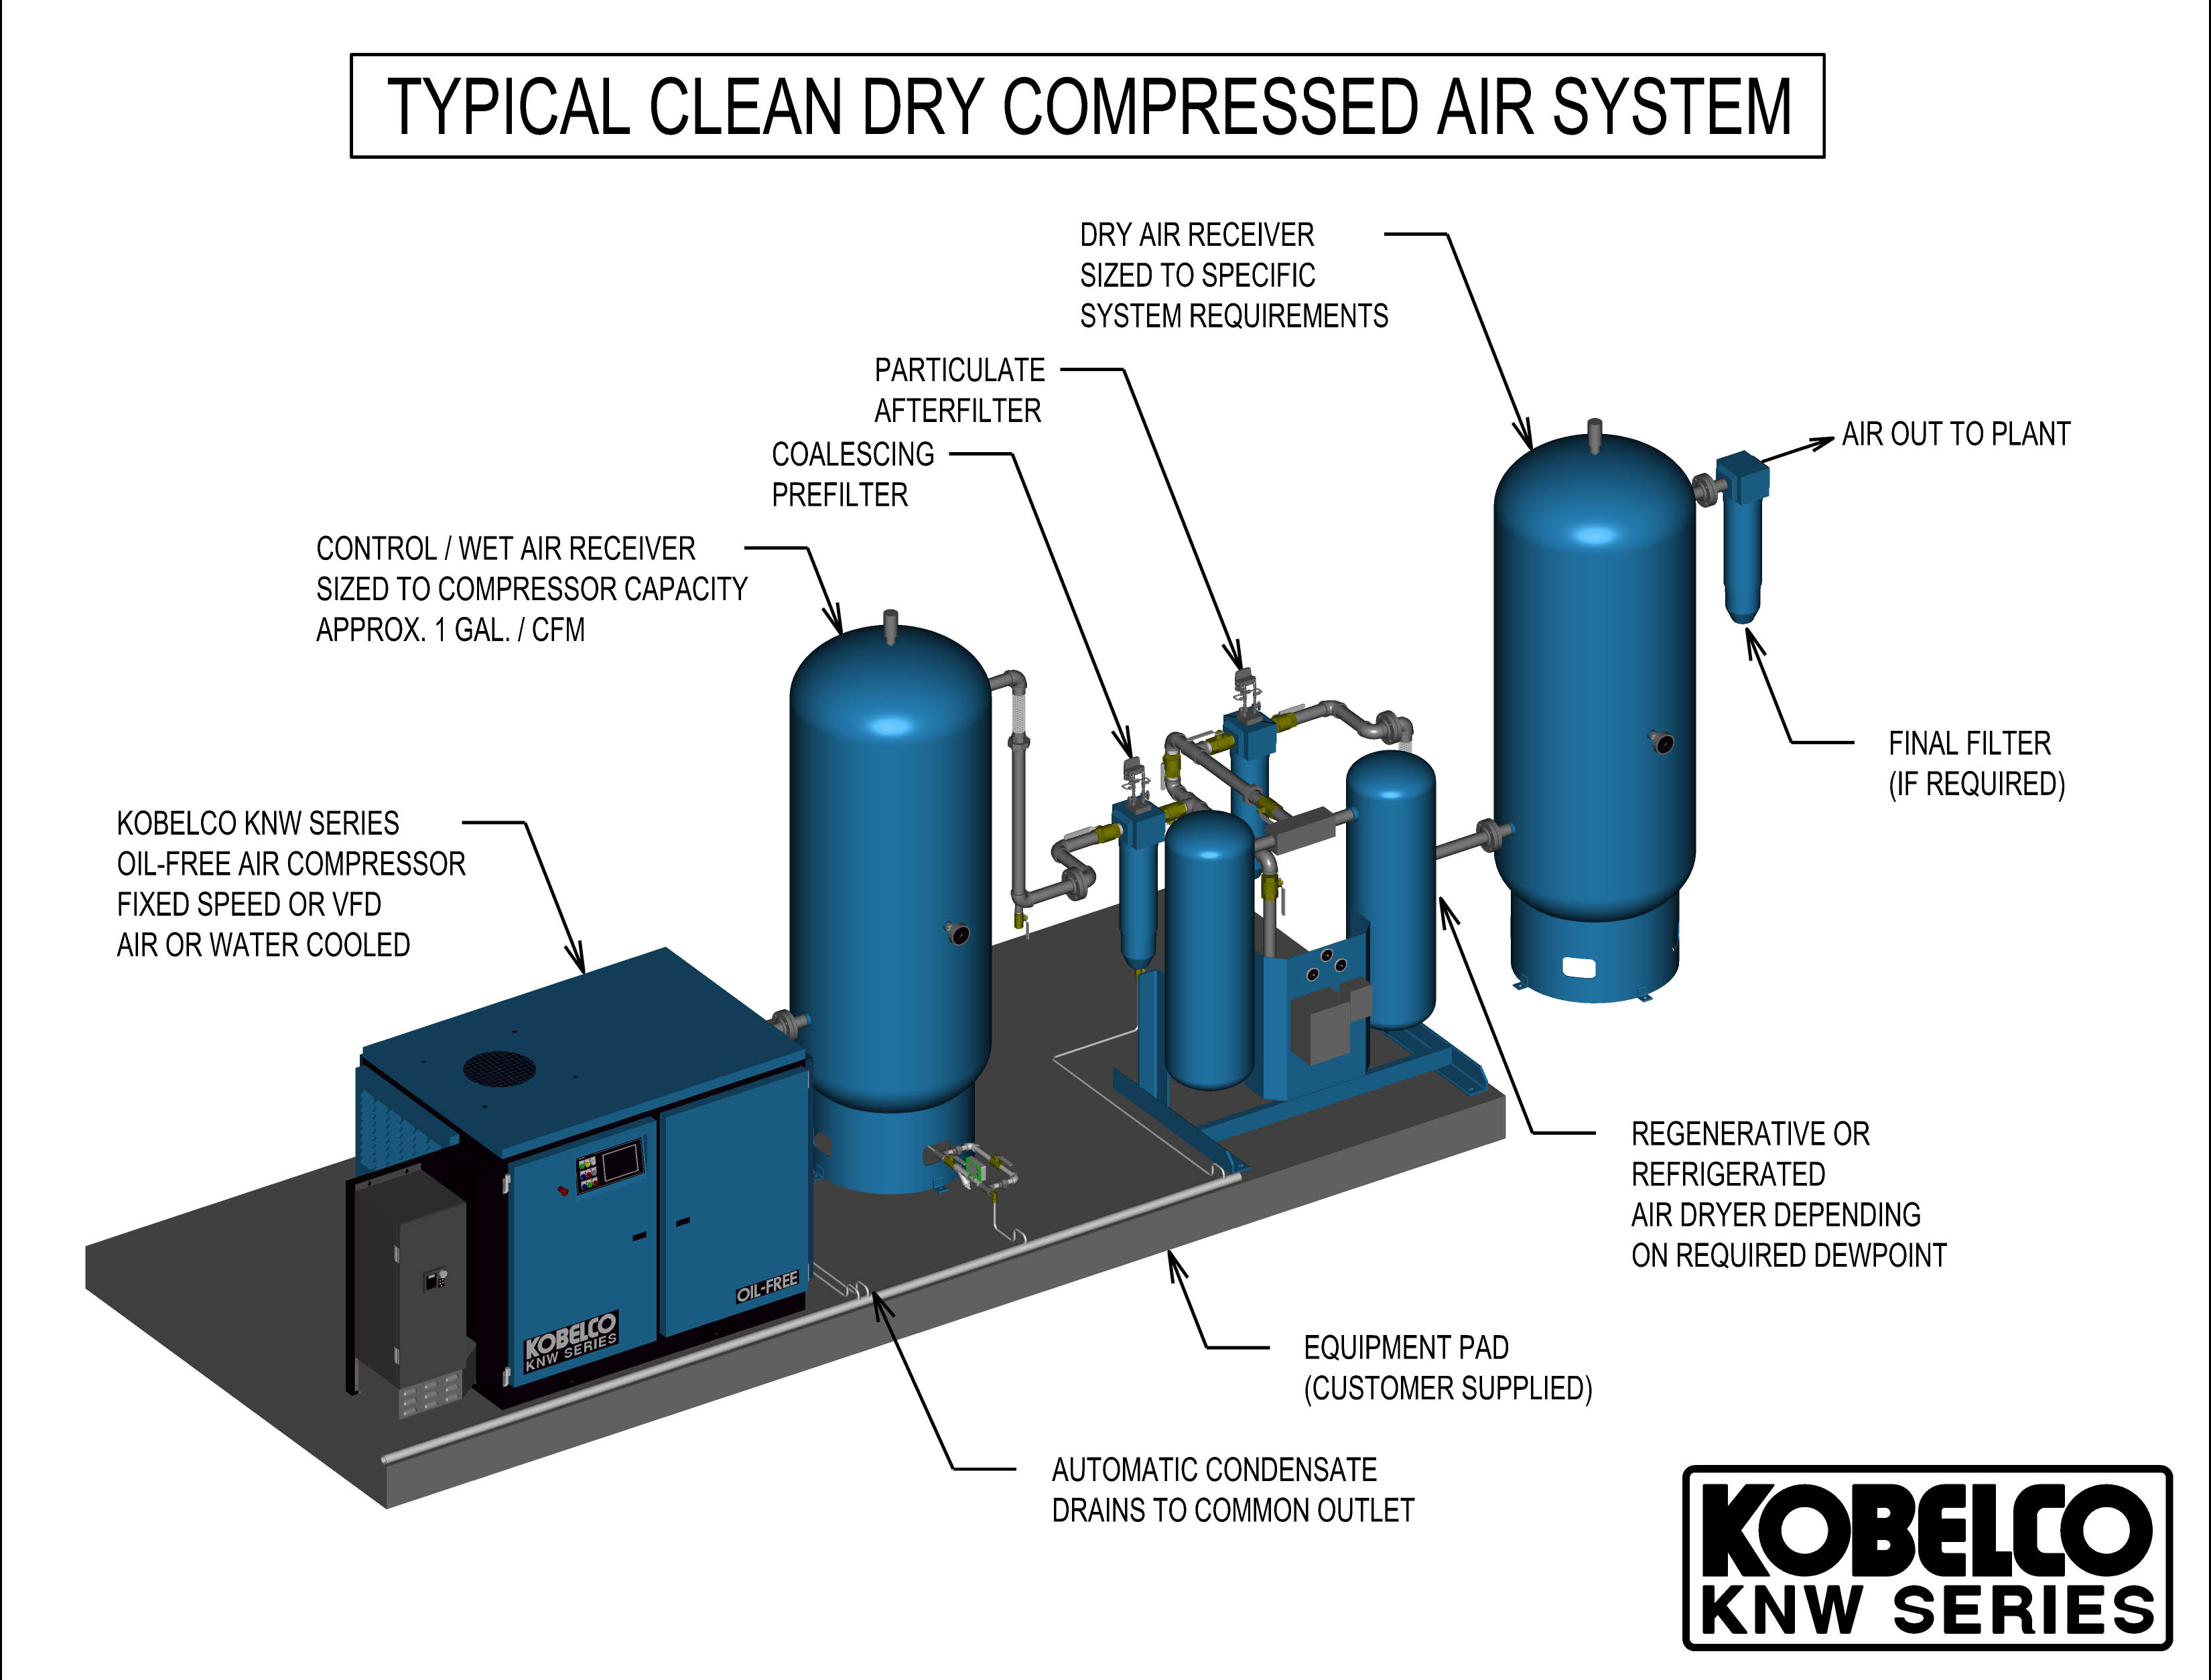 https://knw-series.com//wp-content/uploads/2015/04/Clean-Dry-Air-System-8-19-2014.jpg